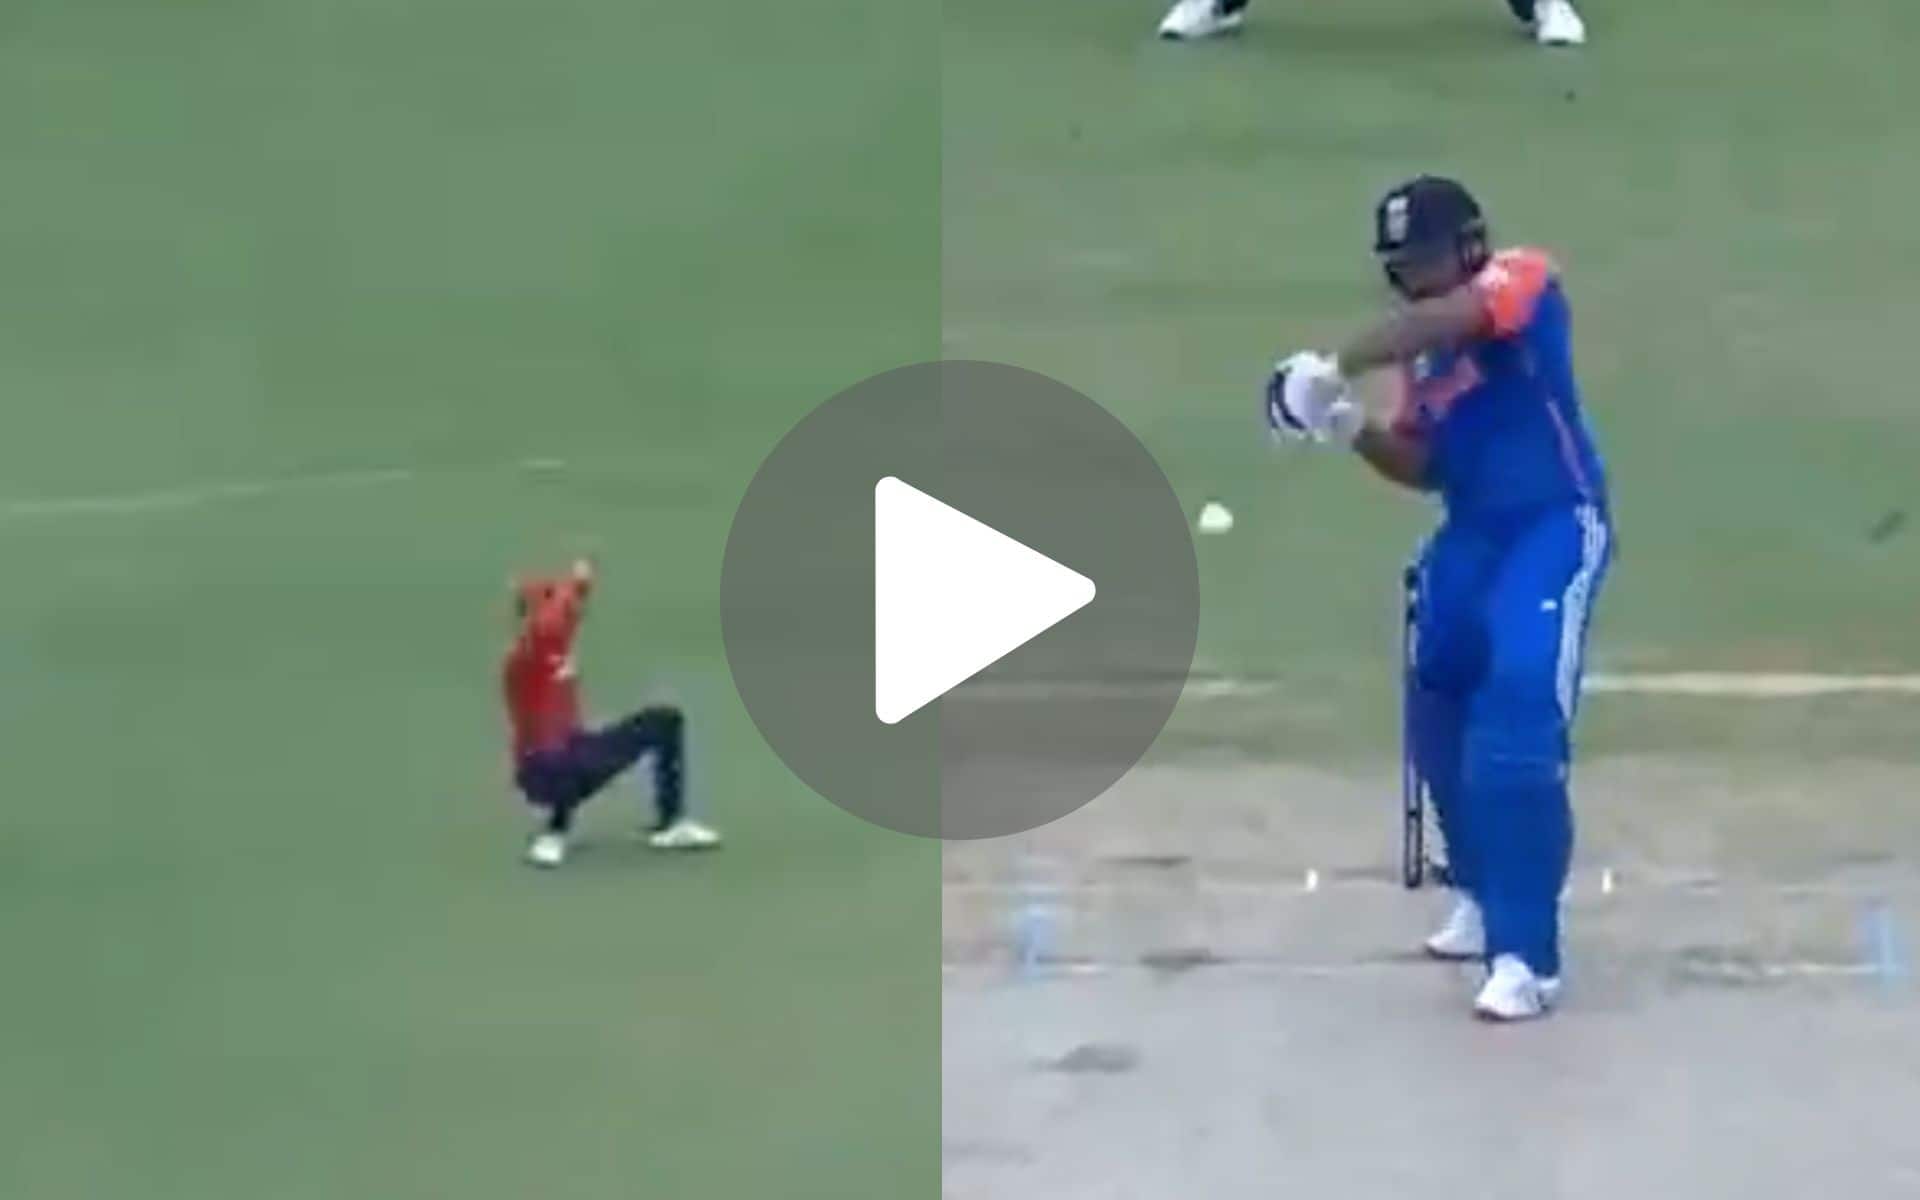 [Watch] Rohit Sharma Gets Dropped By Phil Salt On 5 As IND Captain Cuts Archer Fiercely